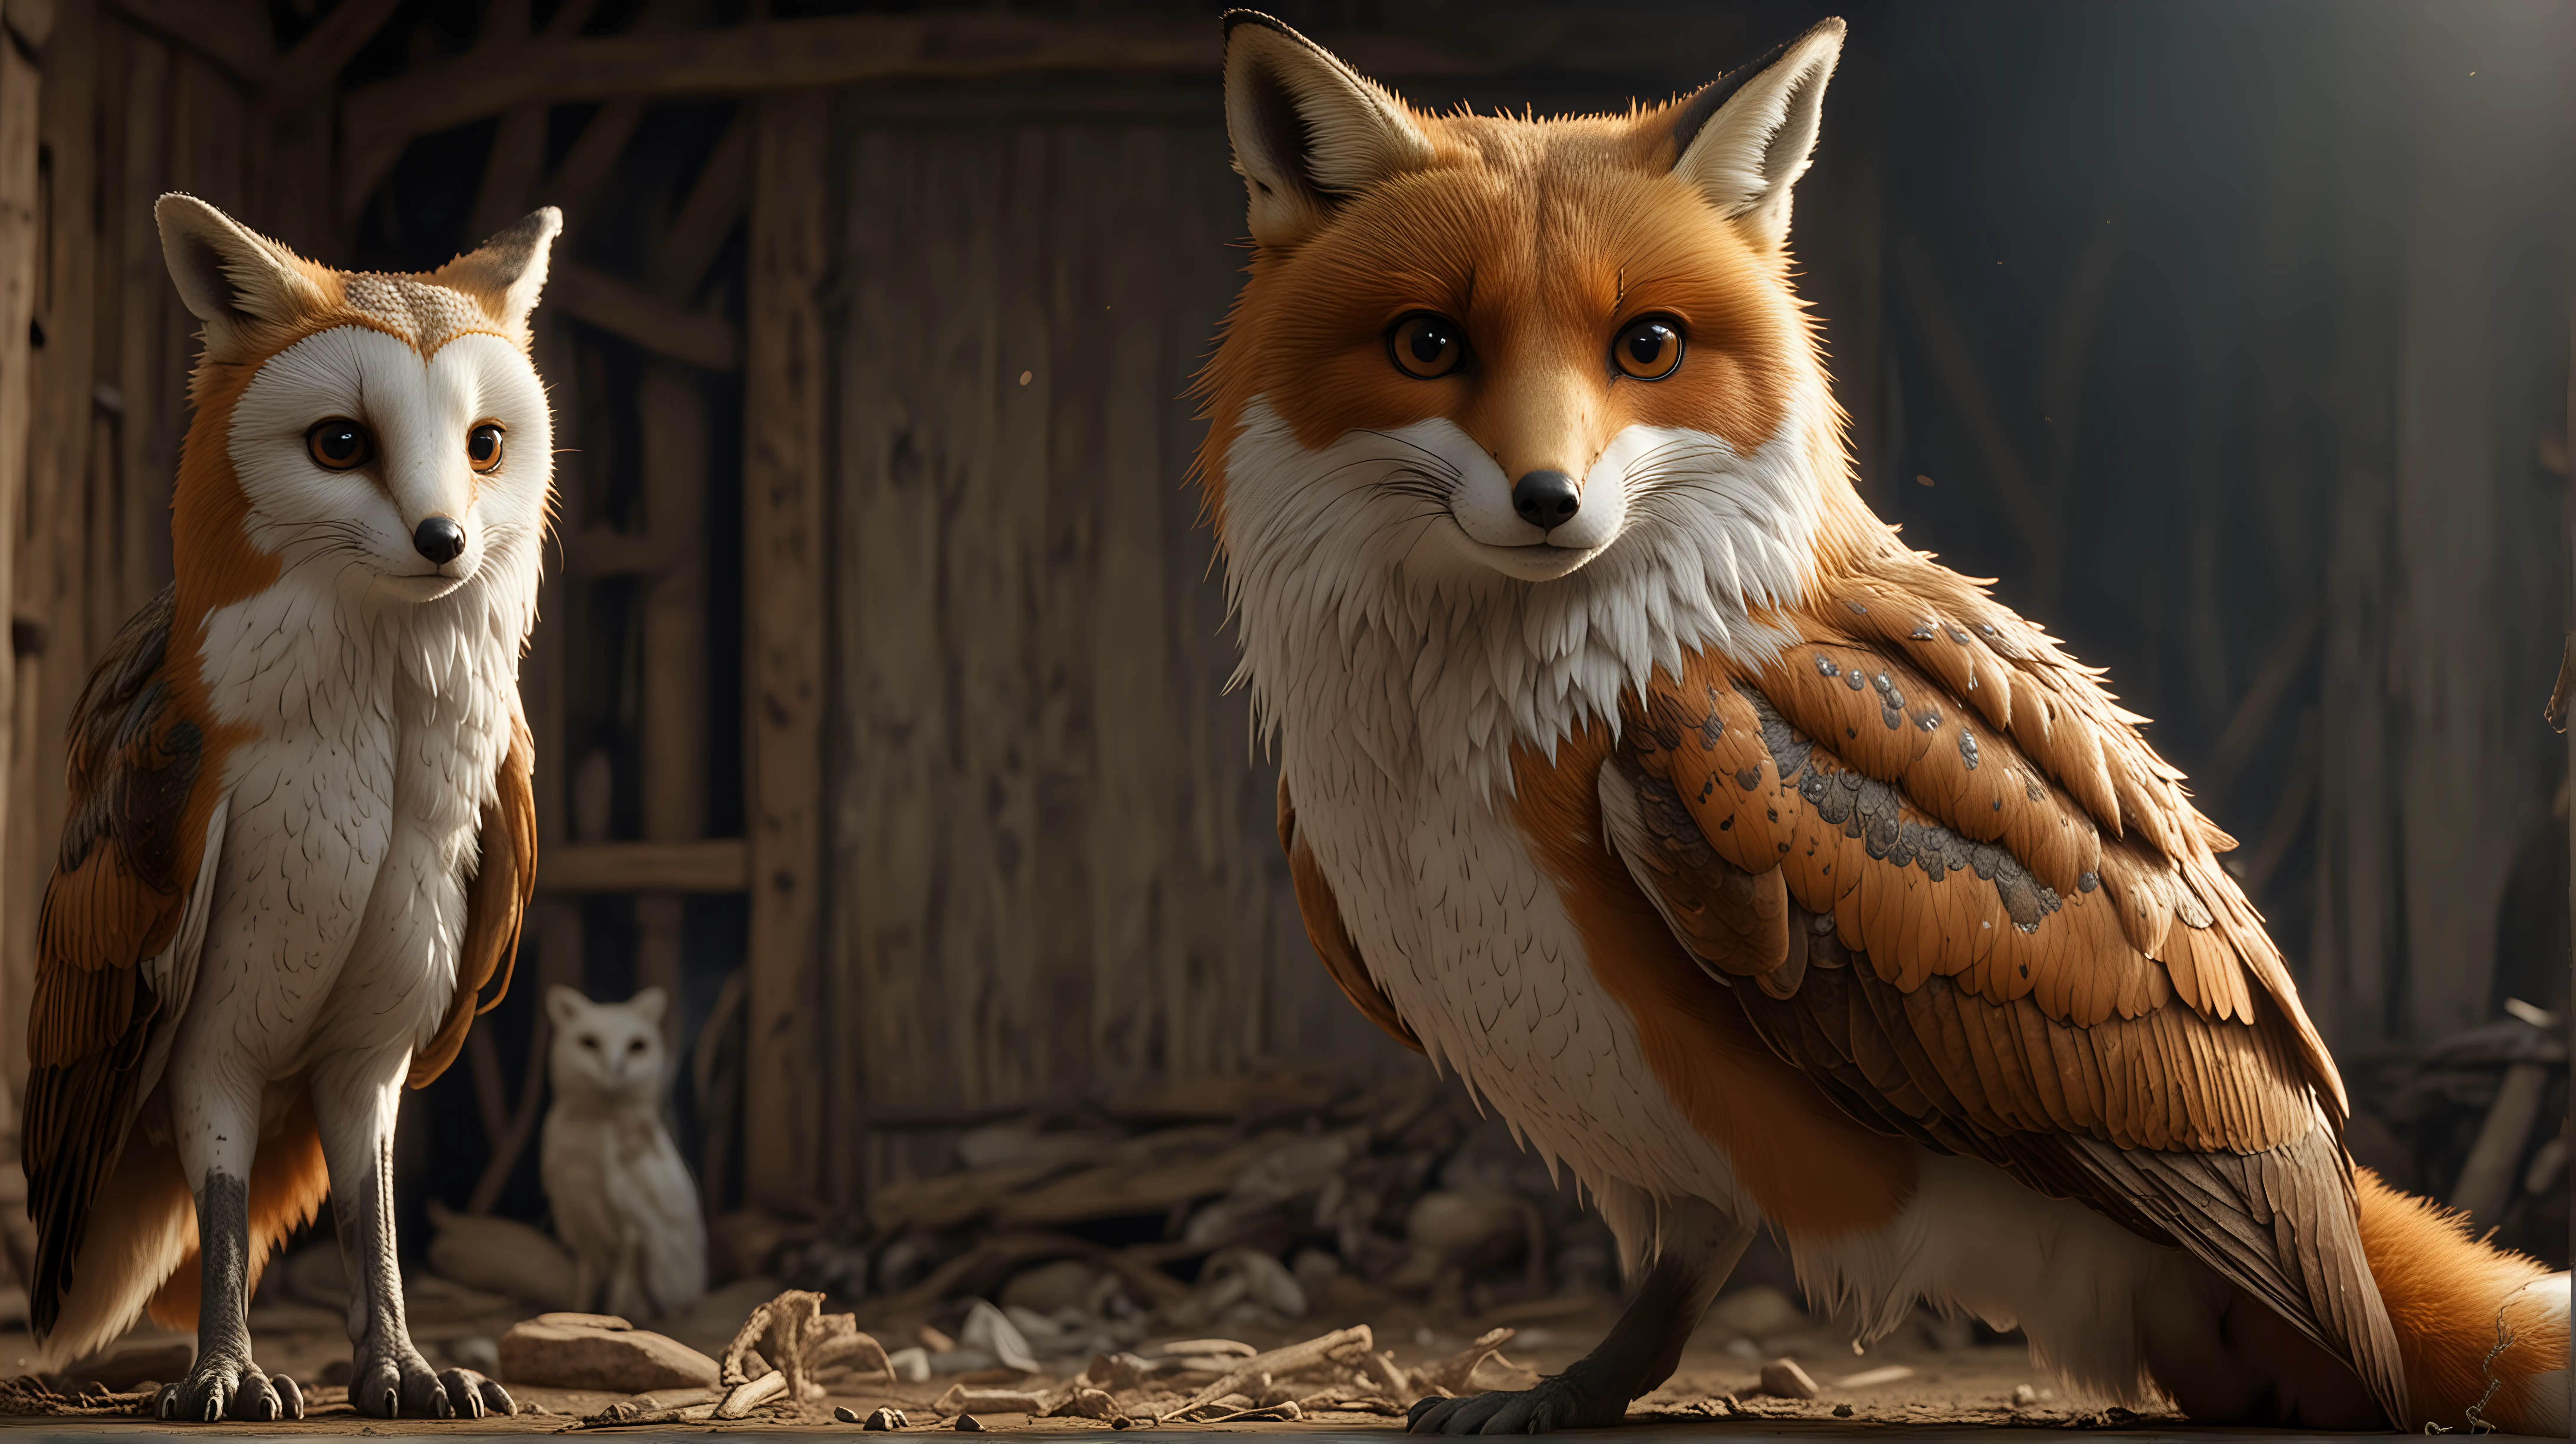 a fictional creature, a fox with barn owl features

full length view
Highly detailed, 4k, hyper-realistic.